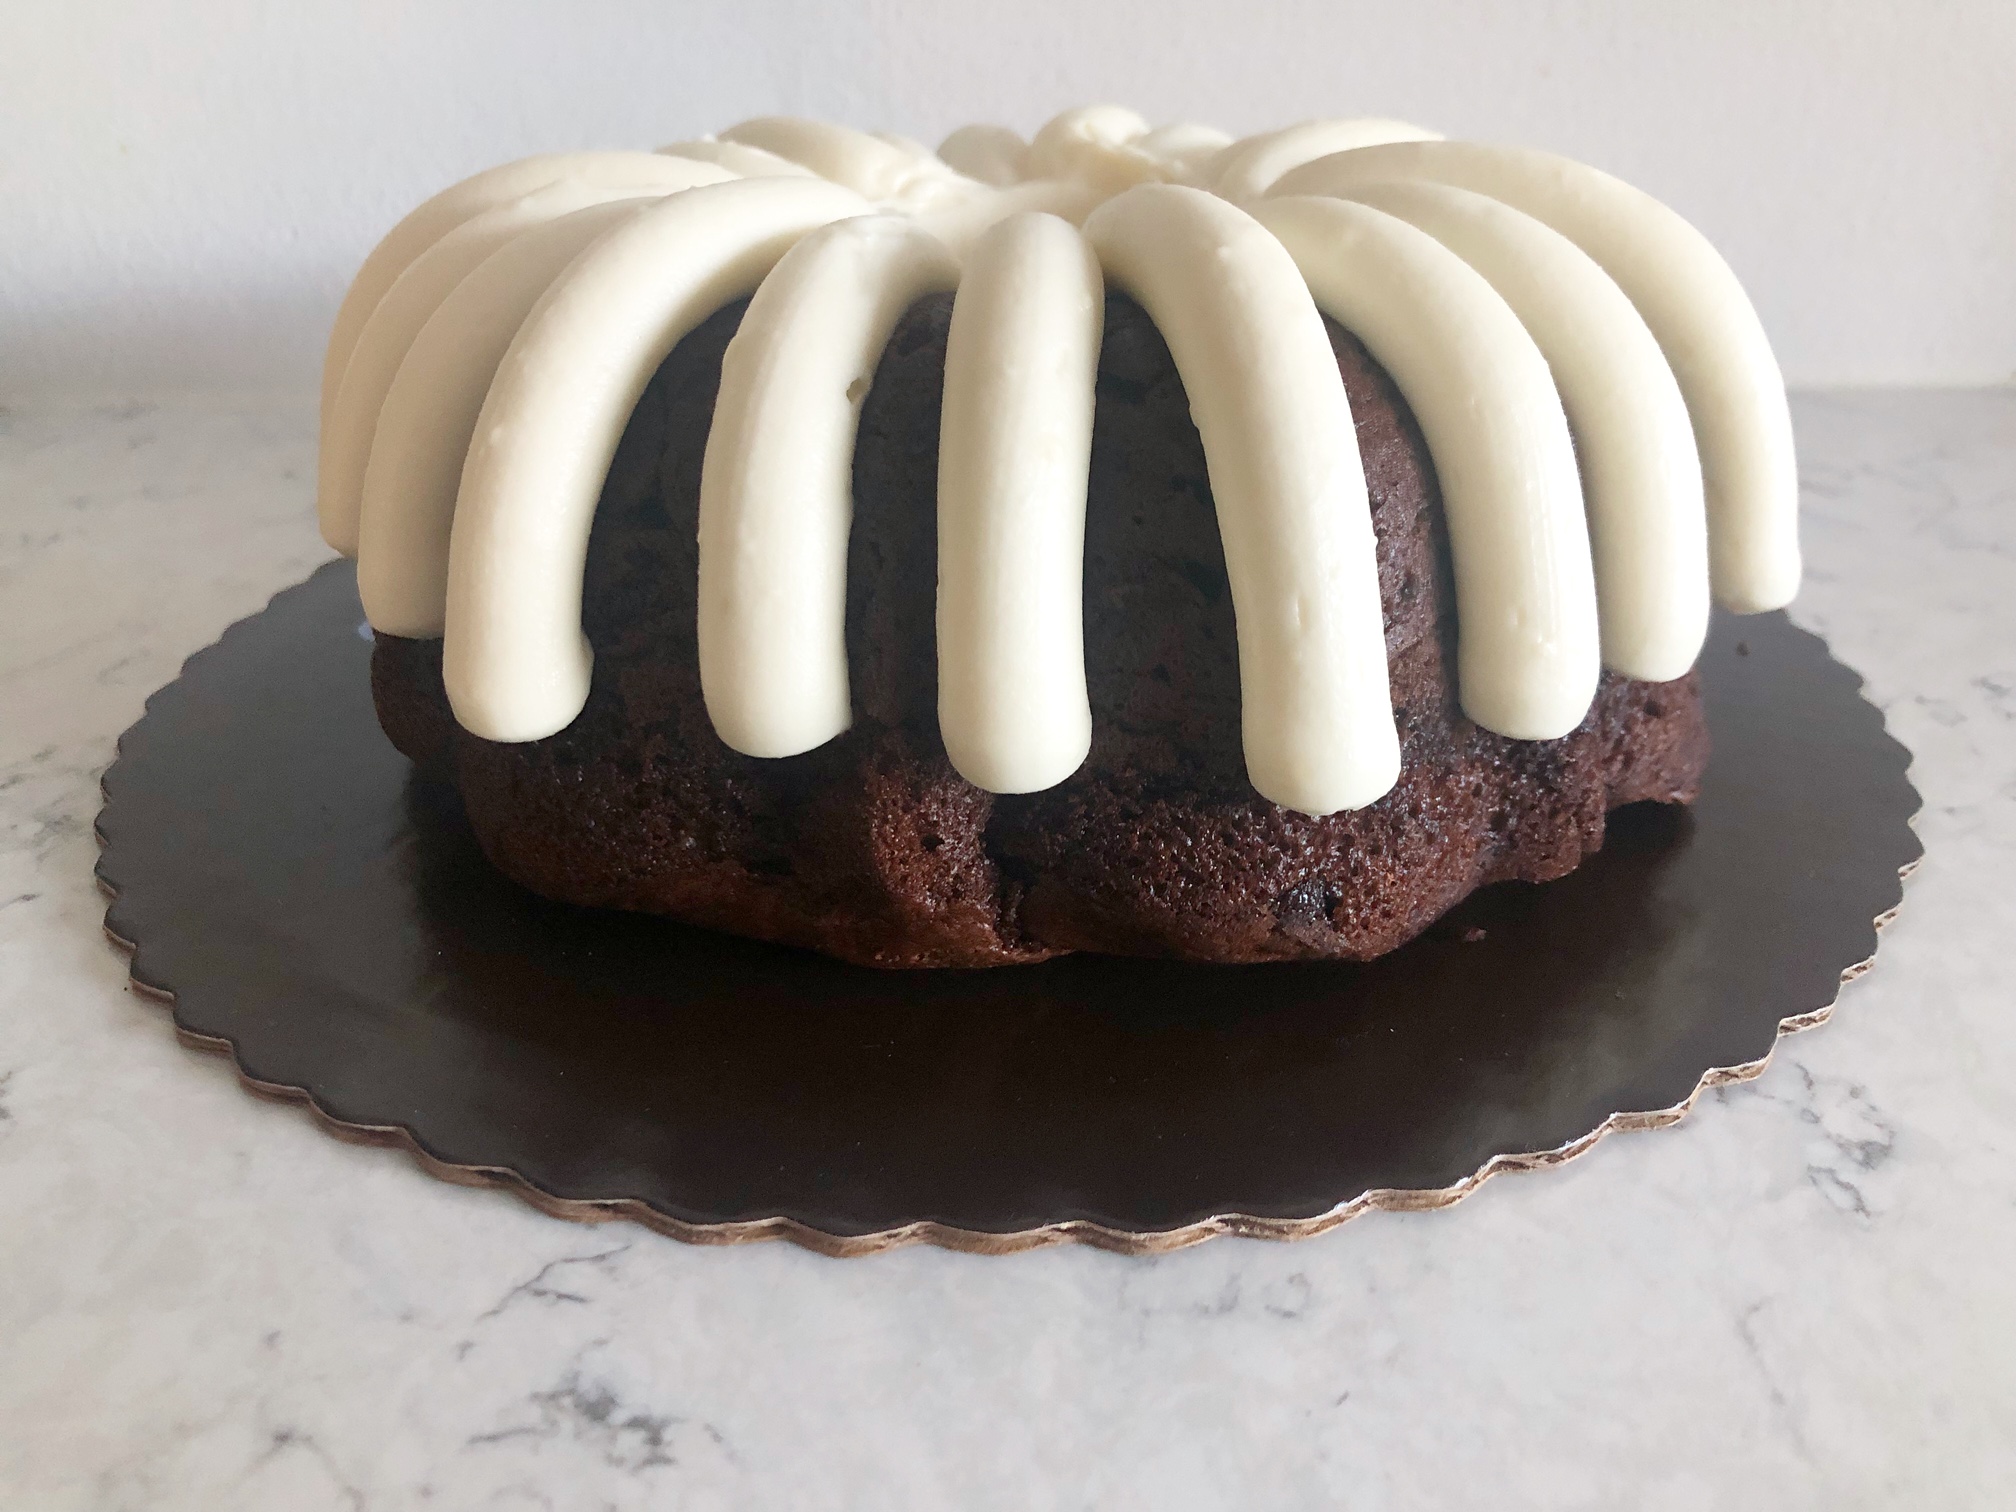 On a marble counter, there is a scalloped cake plate with a chocolate cake and signature cream cheese frosting stripes from Nothing Bundt Cakes. Photo by Alyssa Buckley.